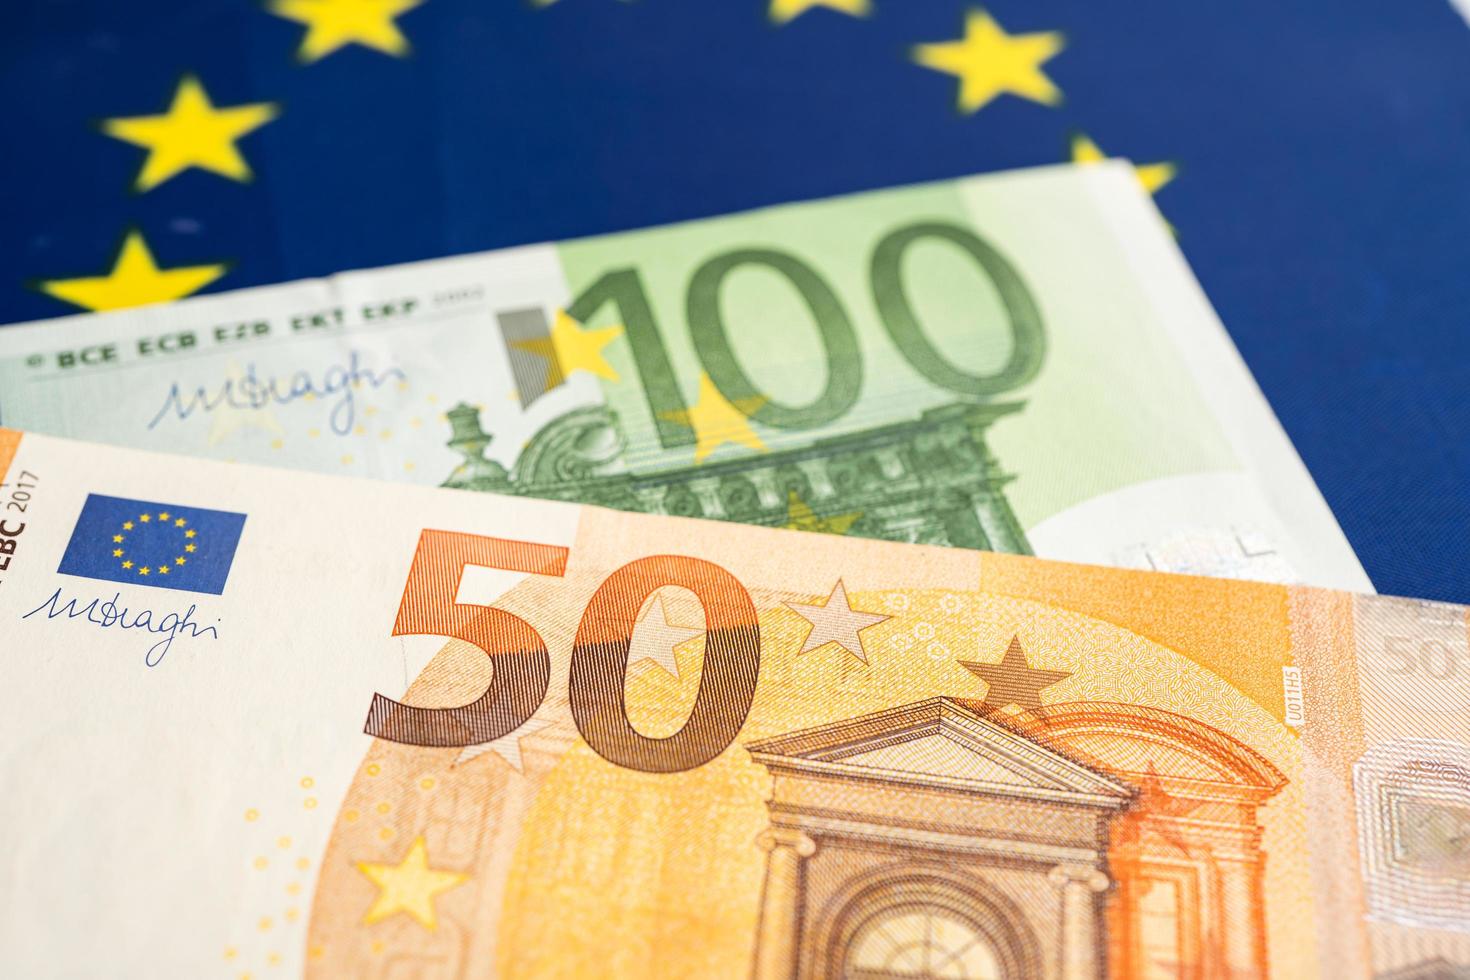 Euro banknotes on EU flag, finance and accounting, banking concept. photo